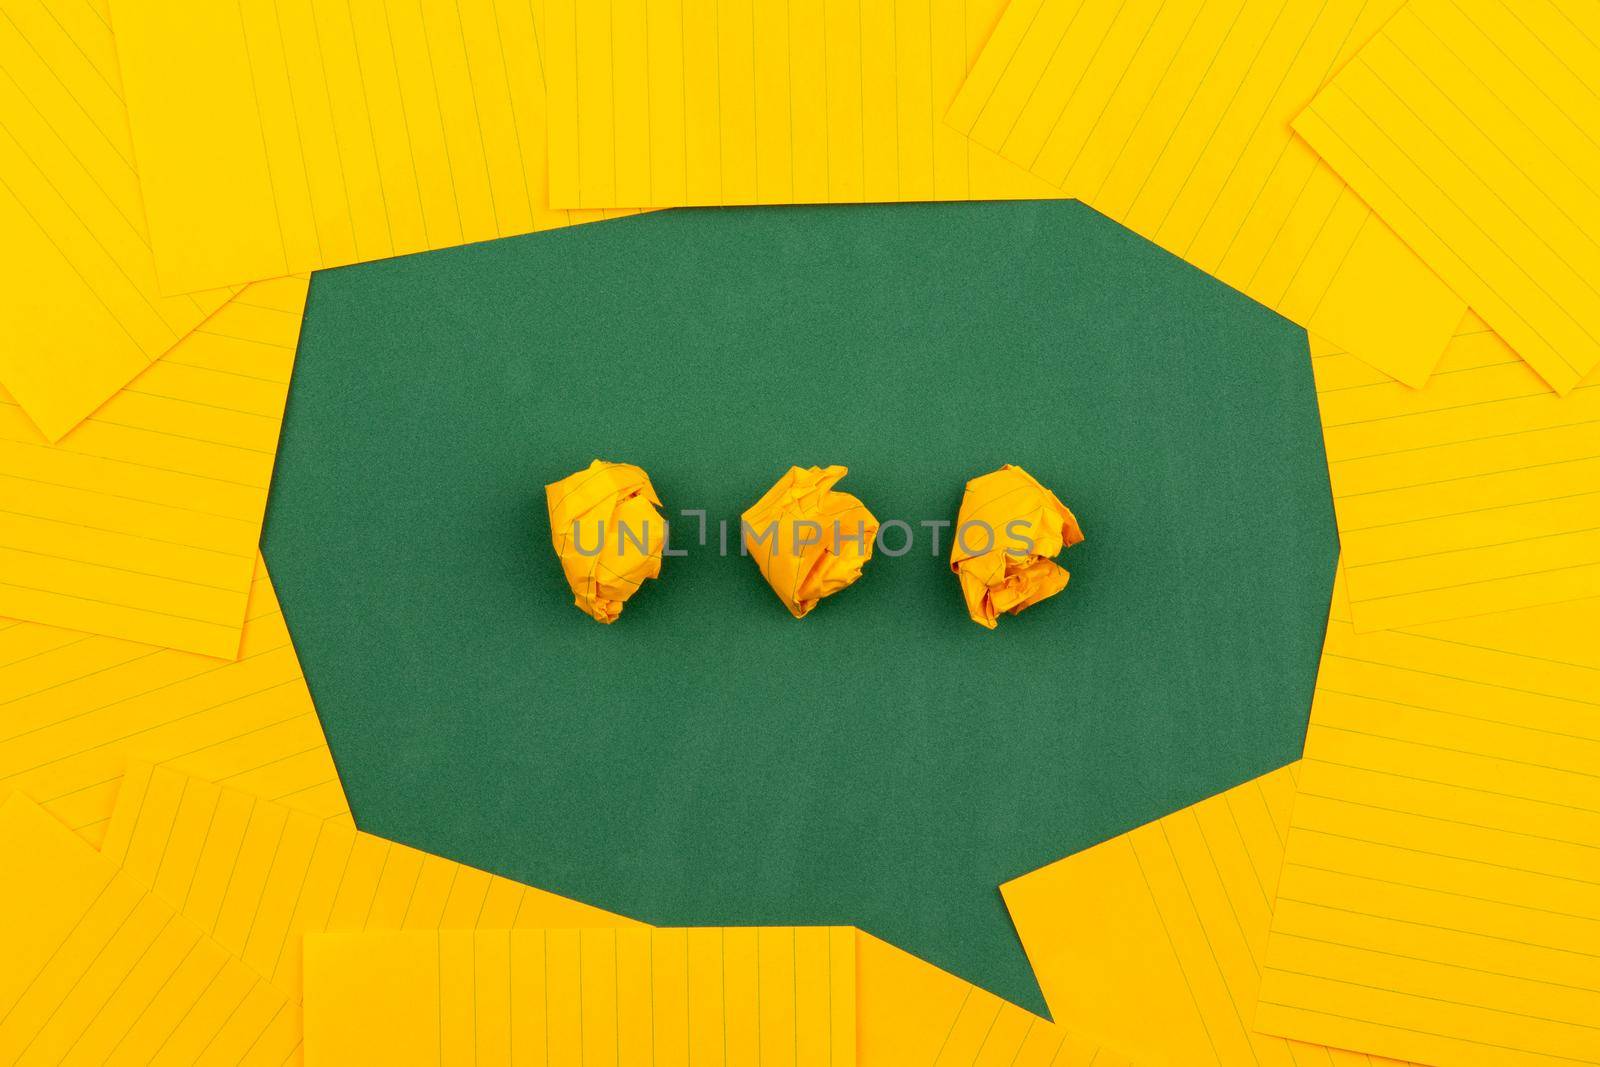 orange sheets of paper lie on a green school board and form a chat bubble with three crumpled papers by lunarts